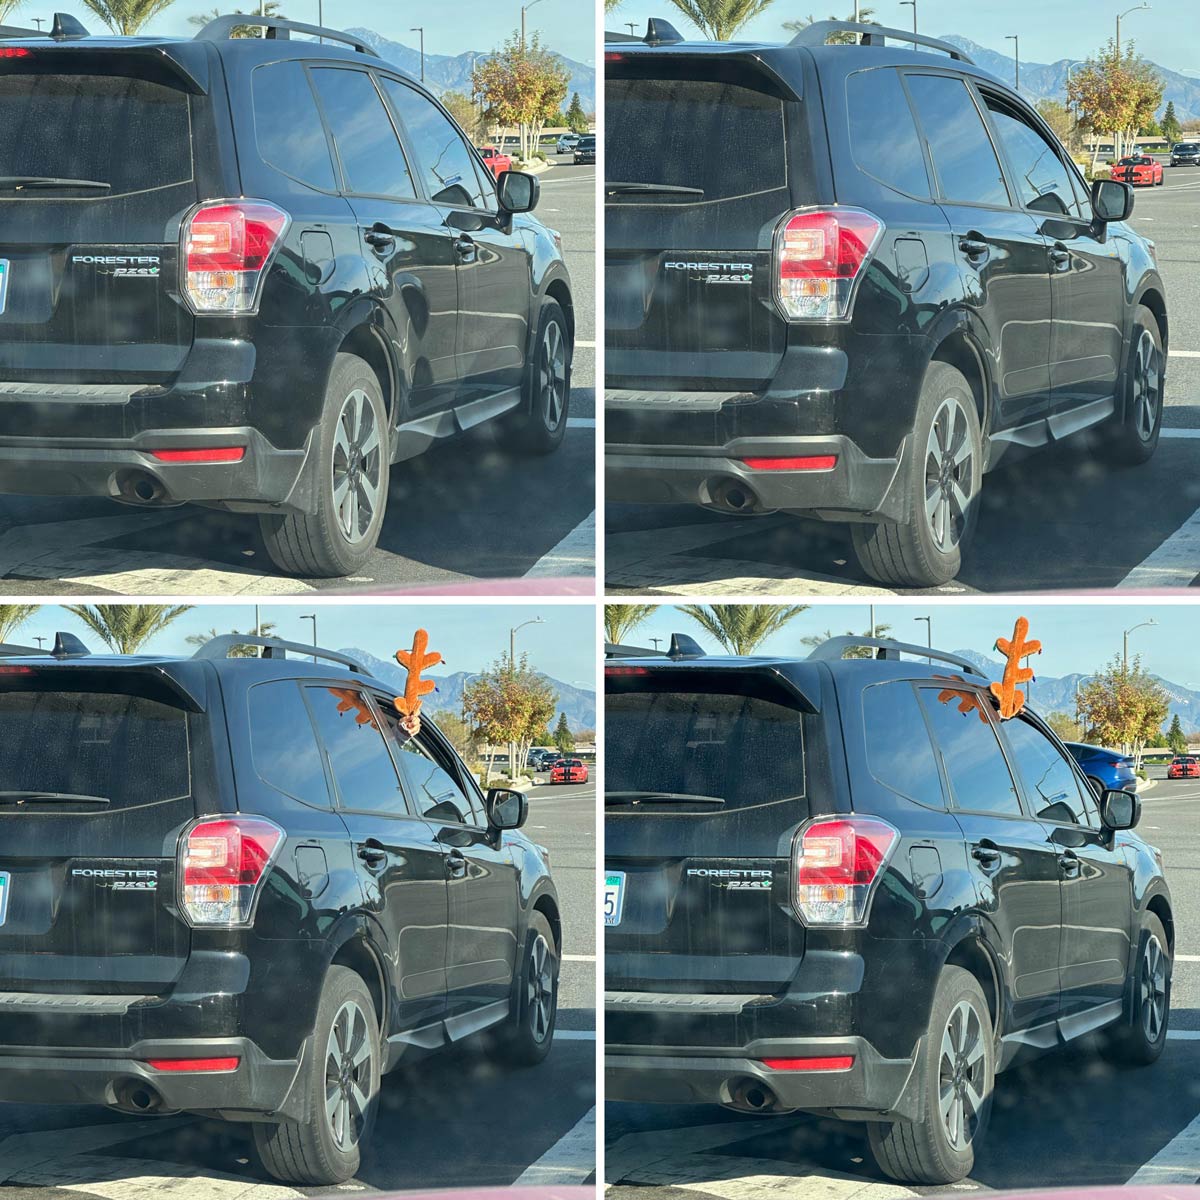 Yesterday I managed to witness the rare and miraculous birth of a seasonal reindeer vehicle while waiting at a red light